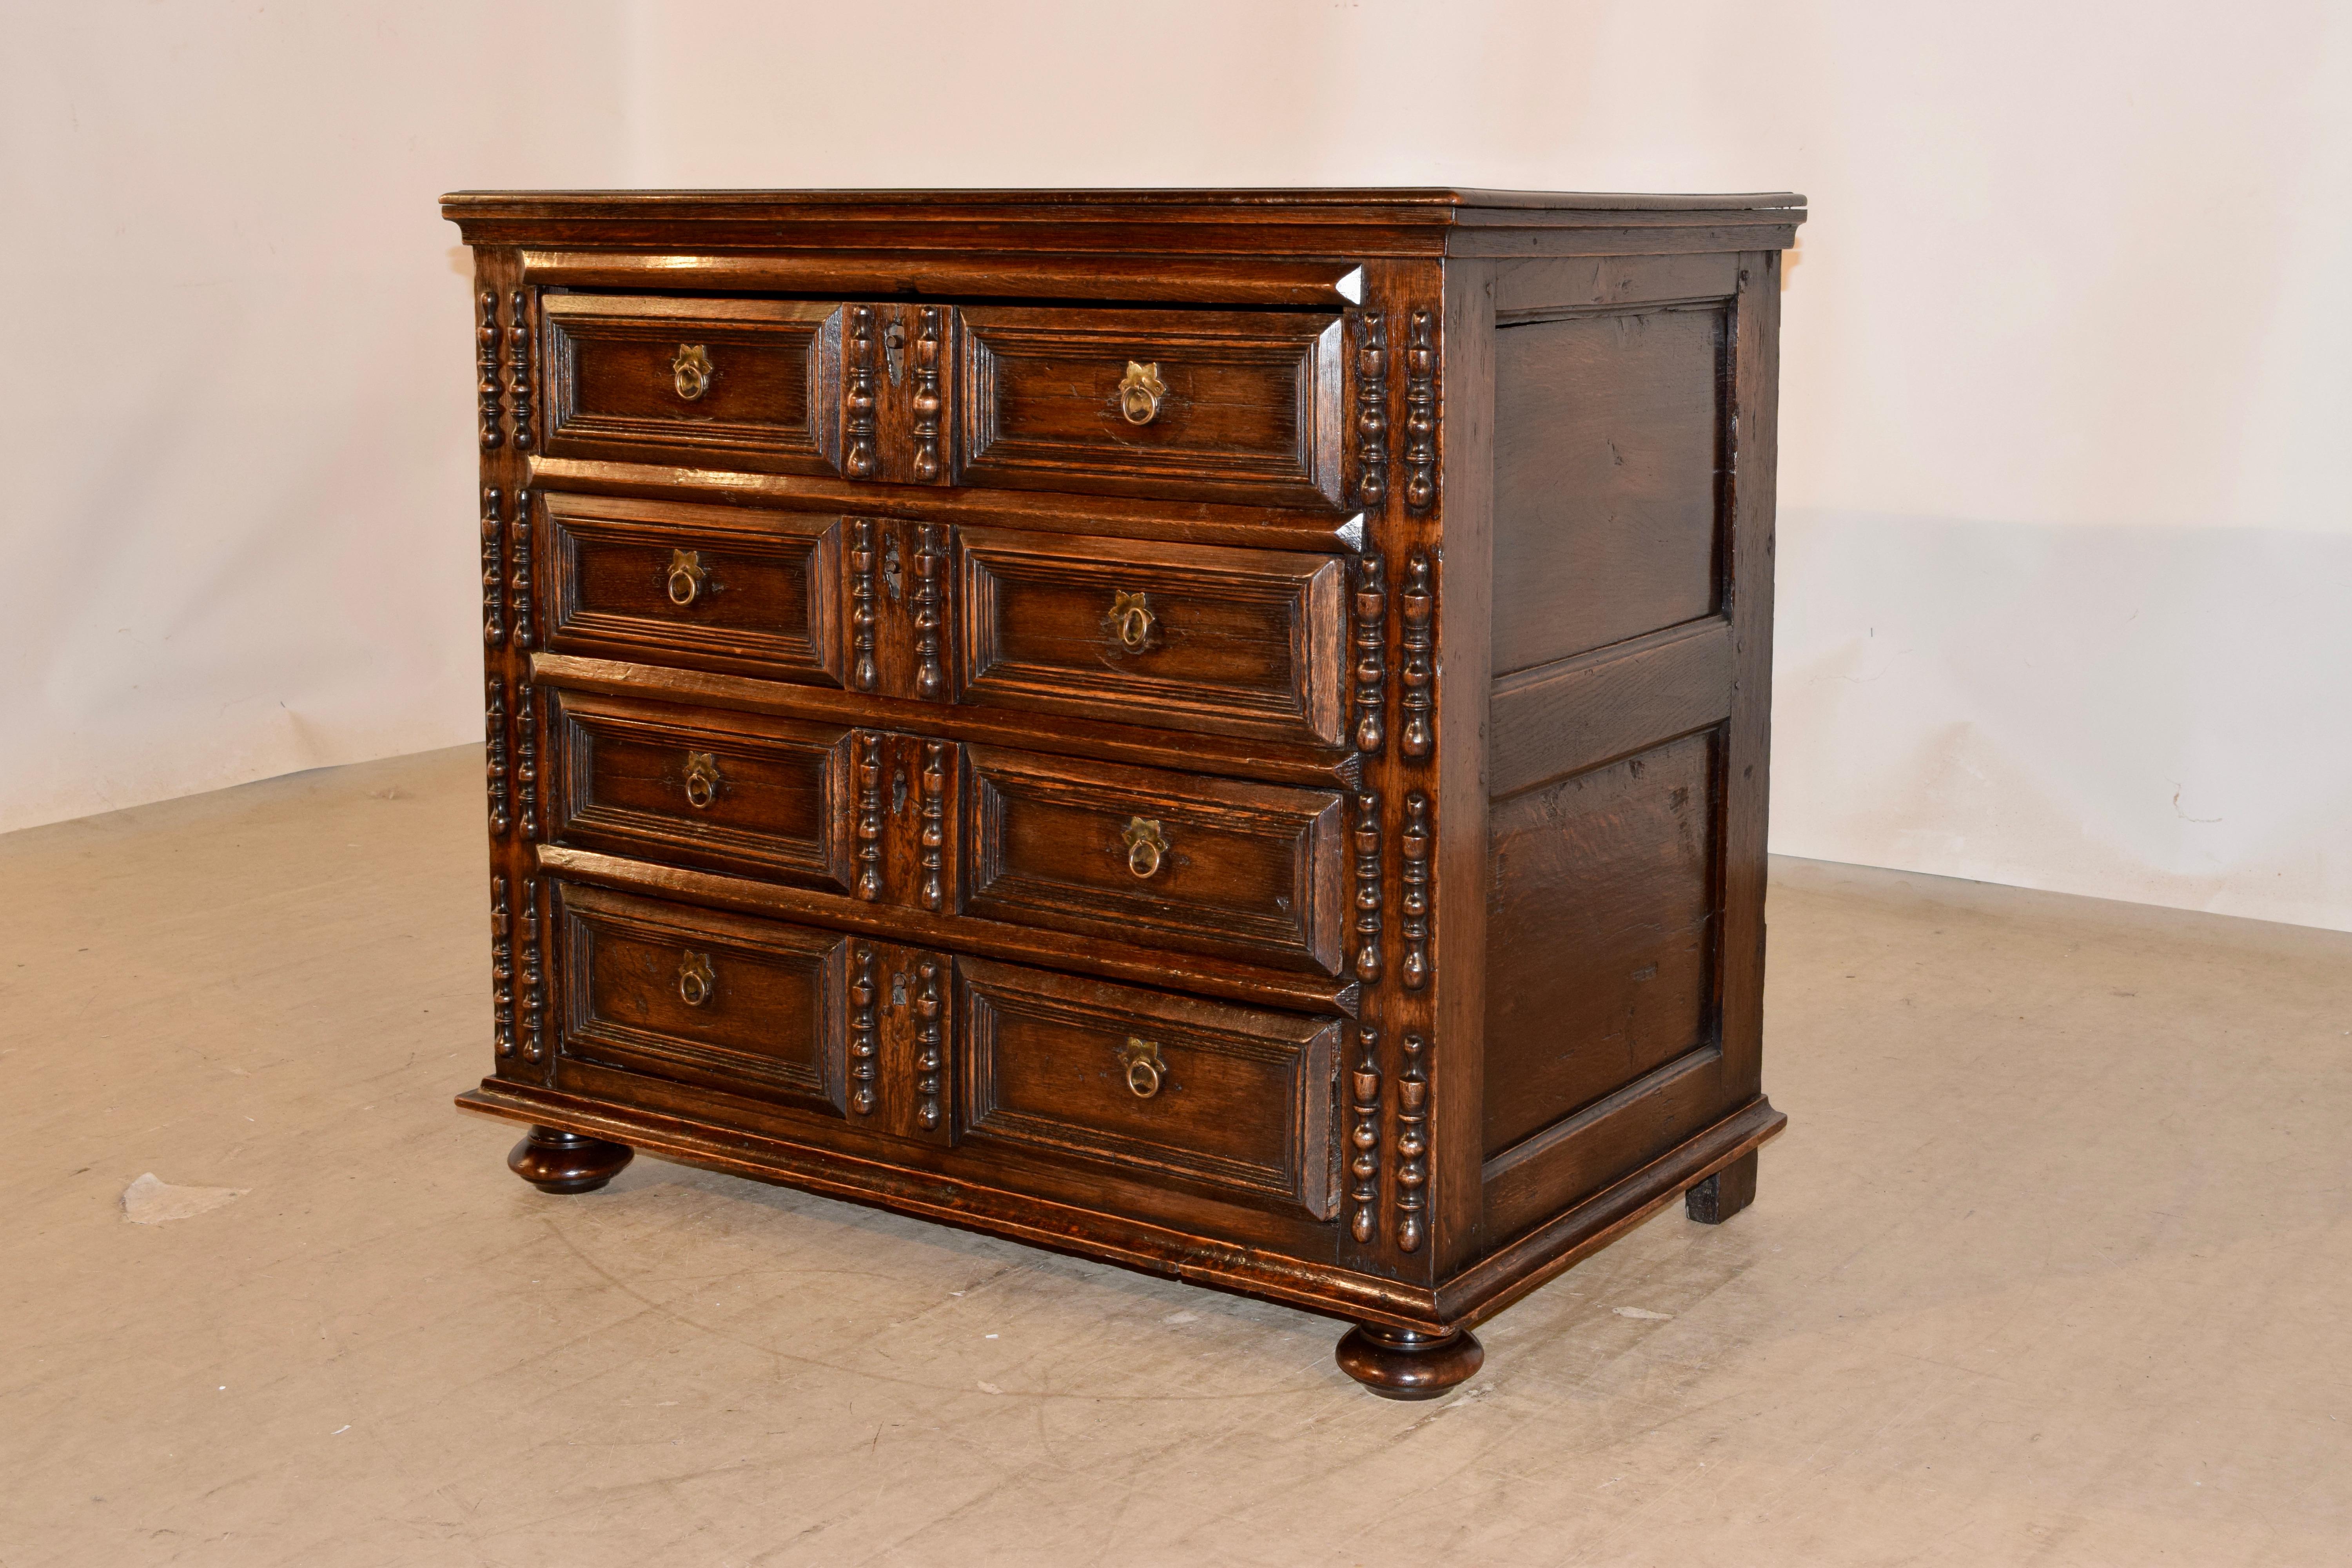 Early 18th Century C. 1700 English Geometric Chest of Drawers